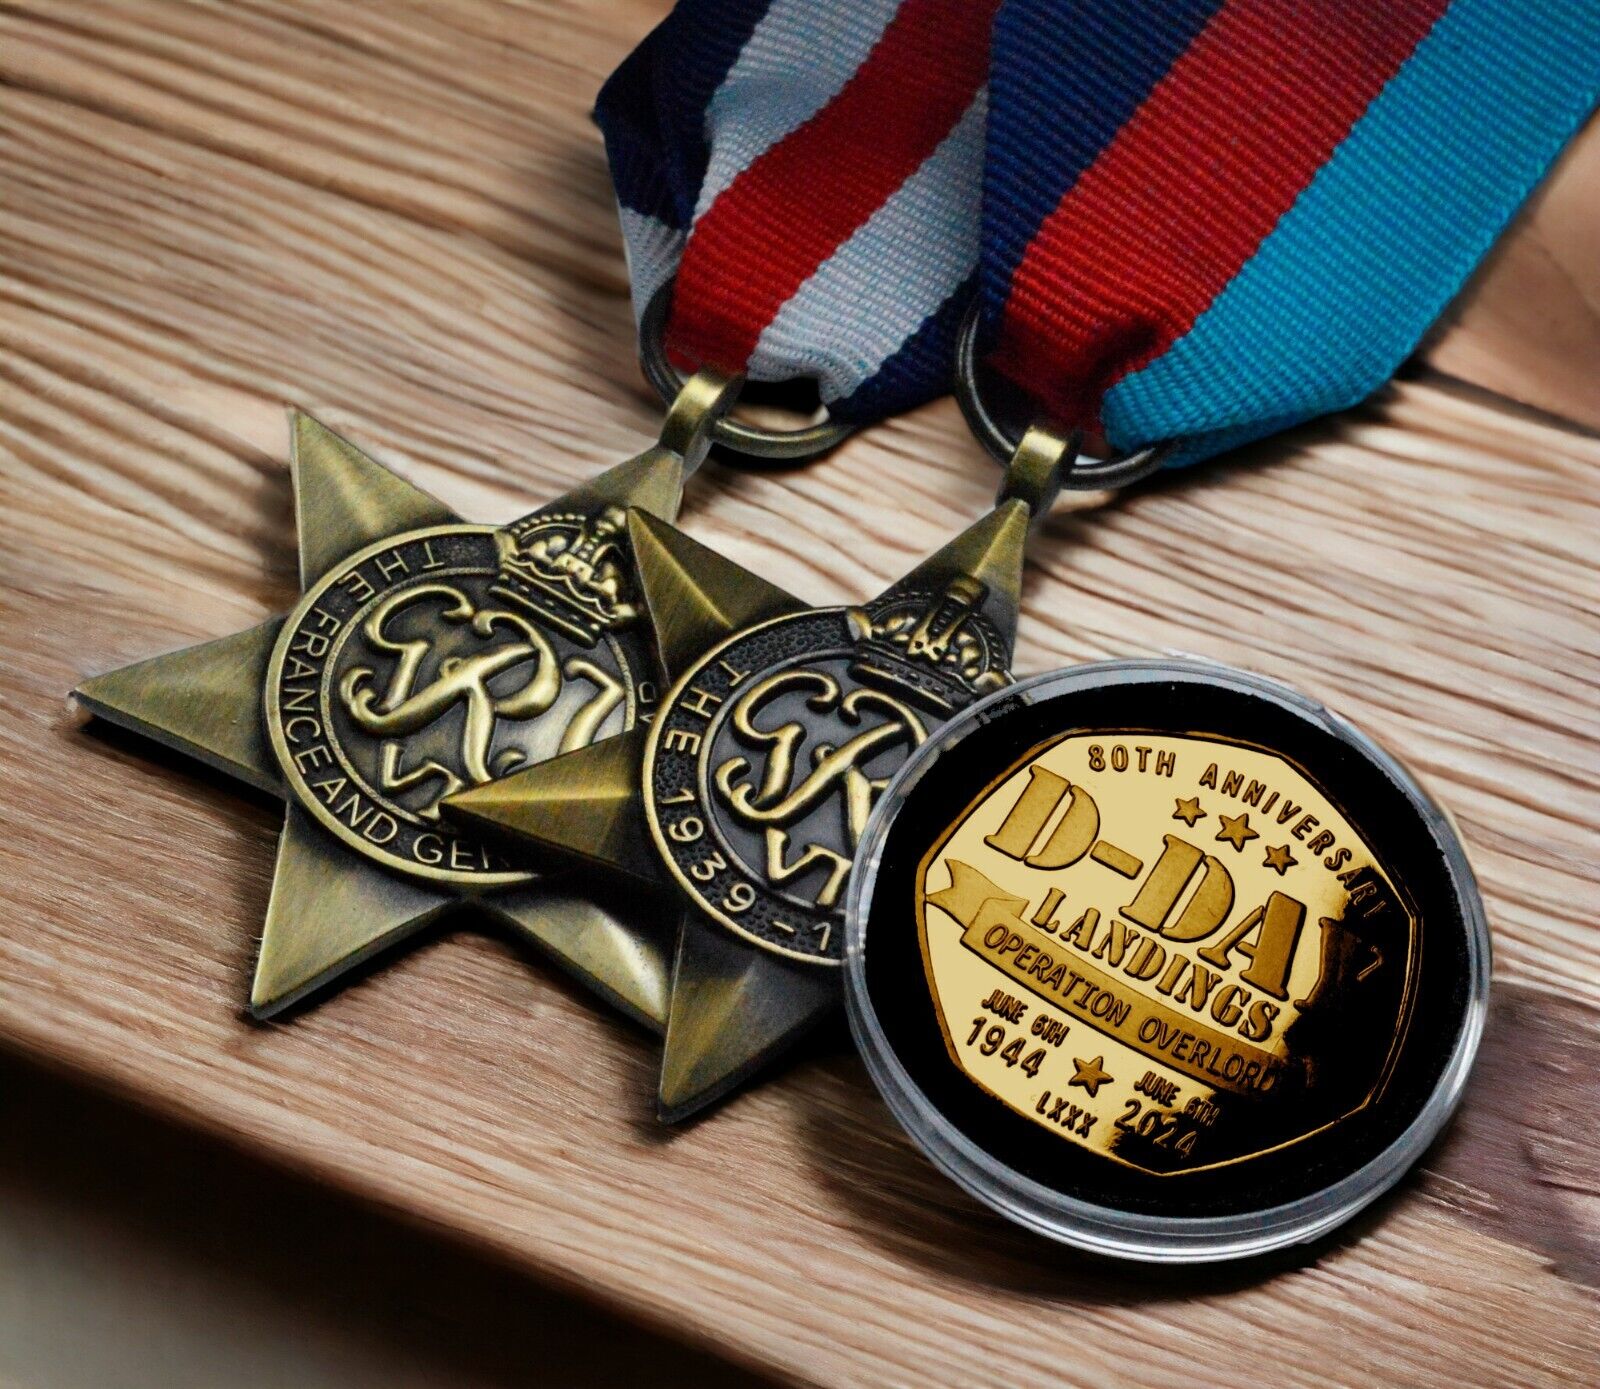 D-DAY LANDINGS 80th Anniversary Commemorative Coin and Campaign Star Medals Set